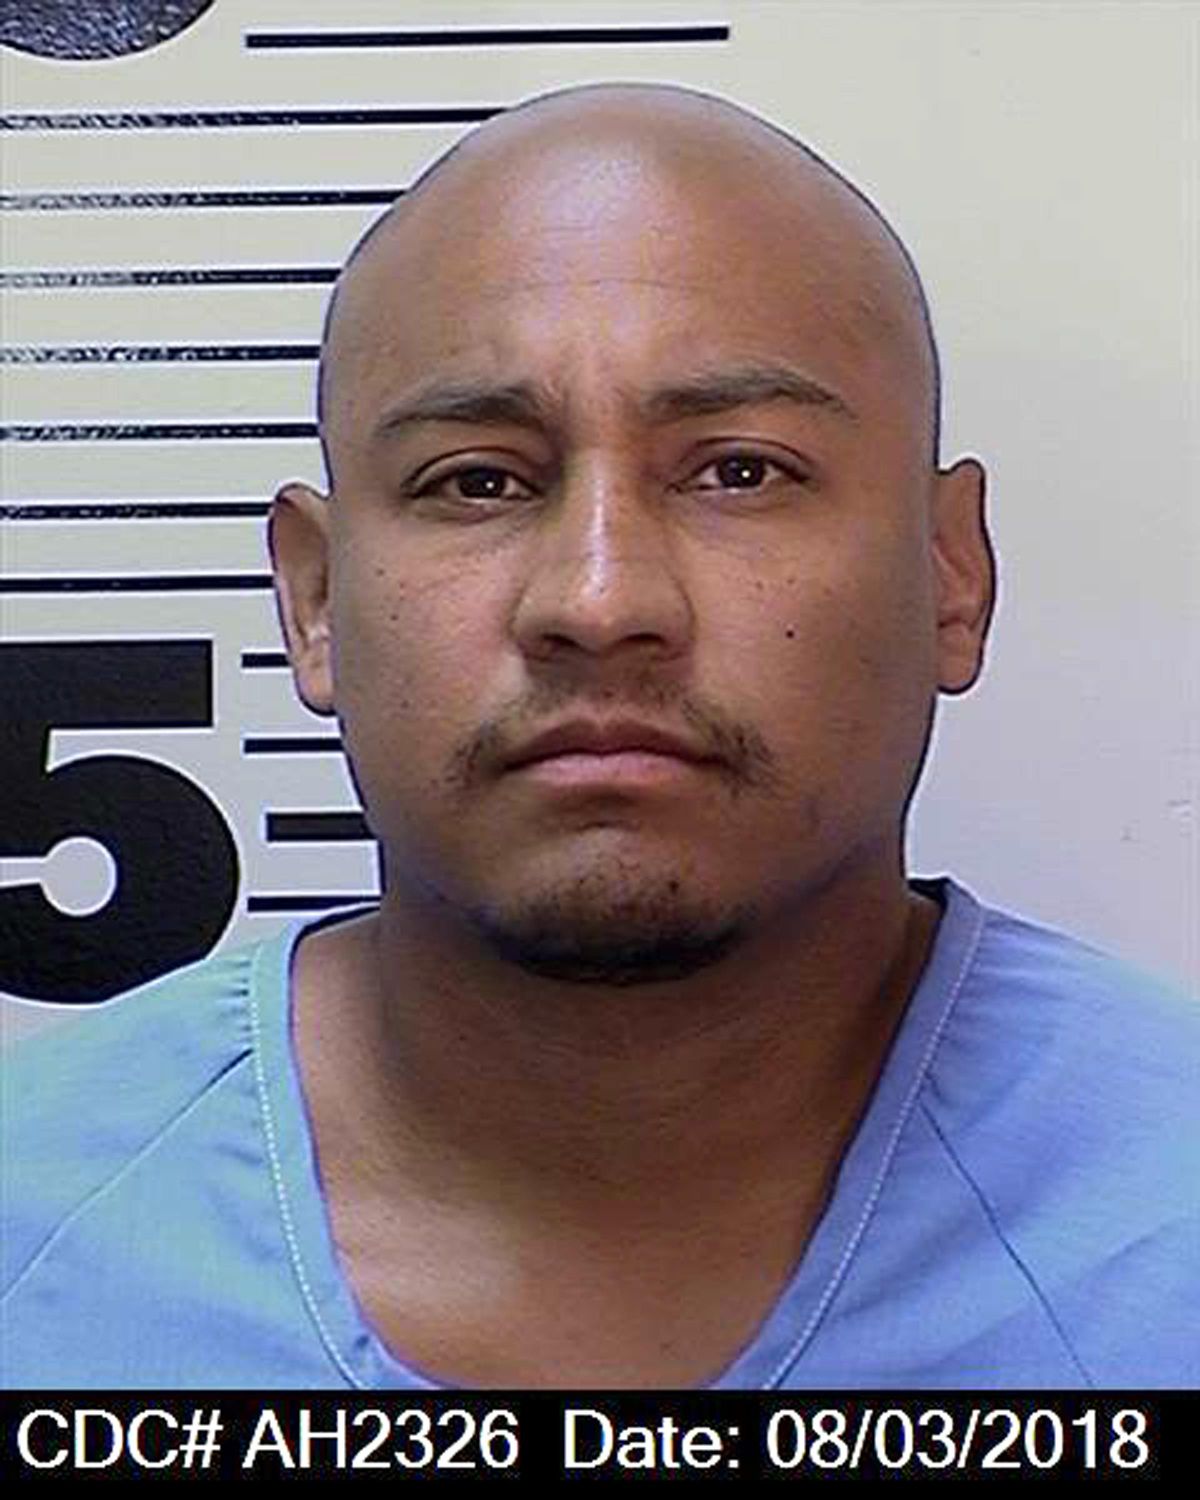 This Aug. 3, 2018 photo provided by the California Department of Corrections and Rehabilitation (CDCR) shows death row inmate Jonathan Fajardo, 30. Corrections spokeswoman Terry Thornton says Fajardo was stabbed to death in the chest and neck with an inmate-made weapon Friday, Oct. 5, 2018, in a recreational yard of the cell house that holds the bulk of condemned inmates at San Quentin State Prison. She says 34-year-old Luis Rodriguez is considered the suspect. (AP)